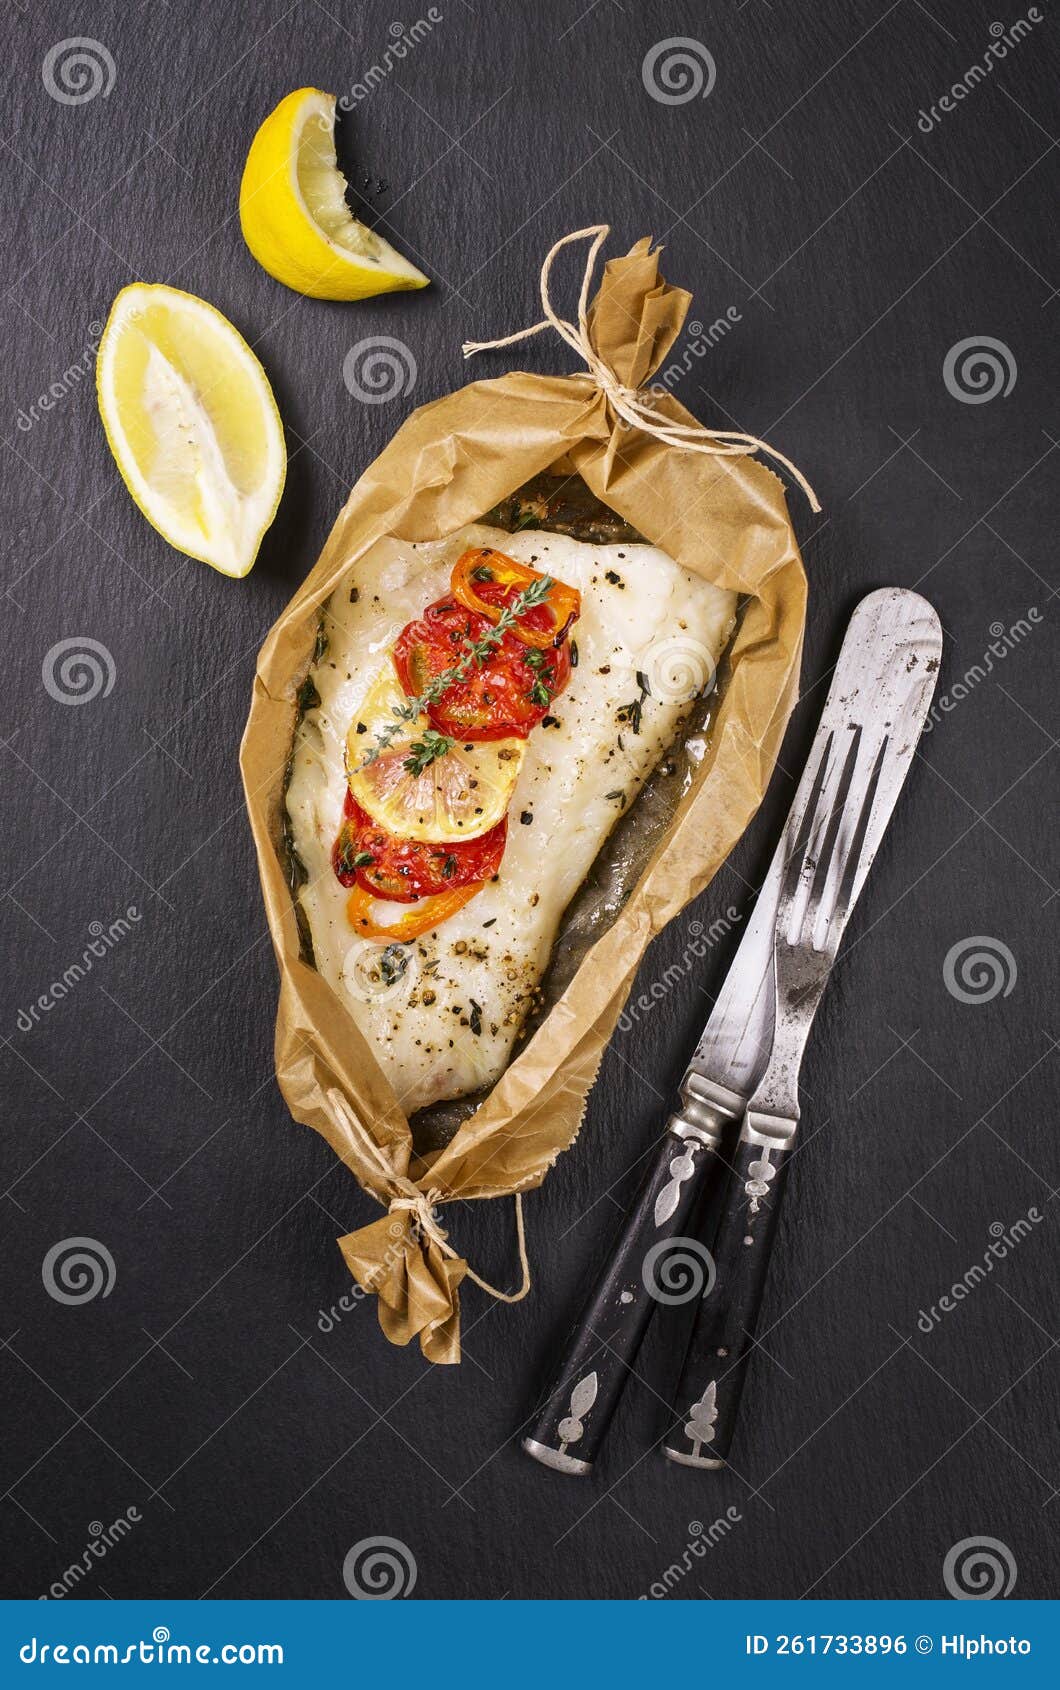 Traditional Steamed Cod Fish Fillet with Vegetable and Herbs in